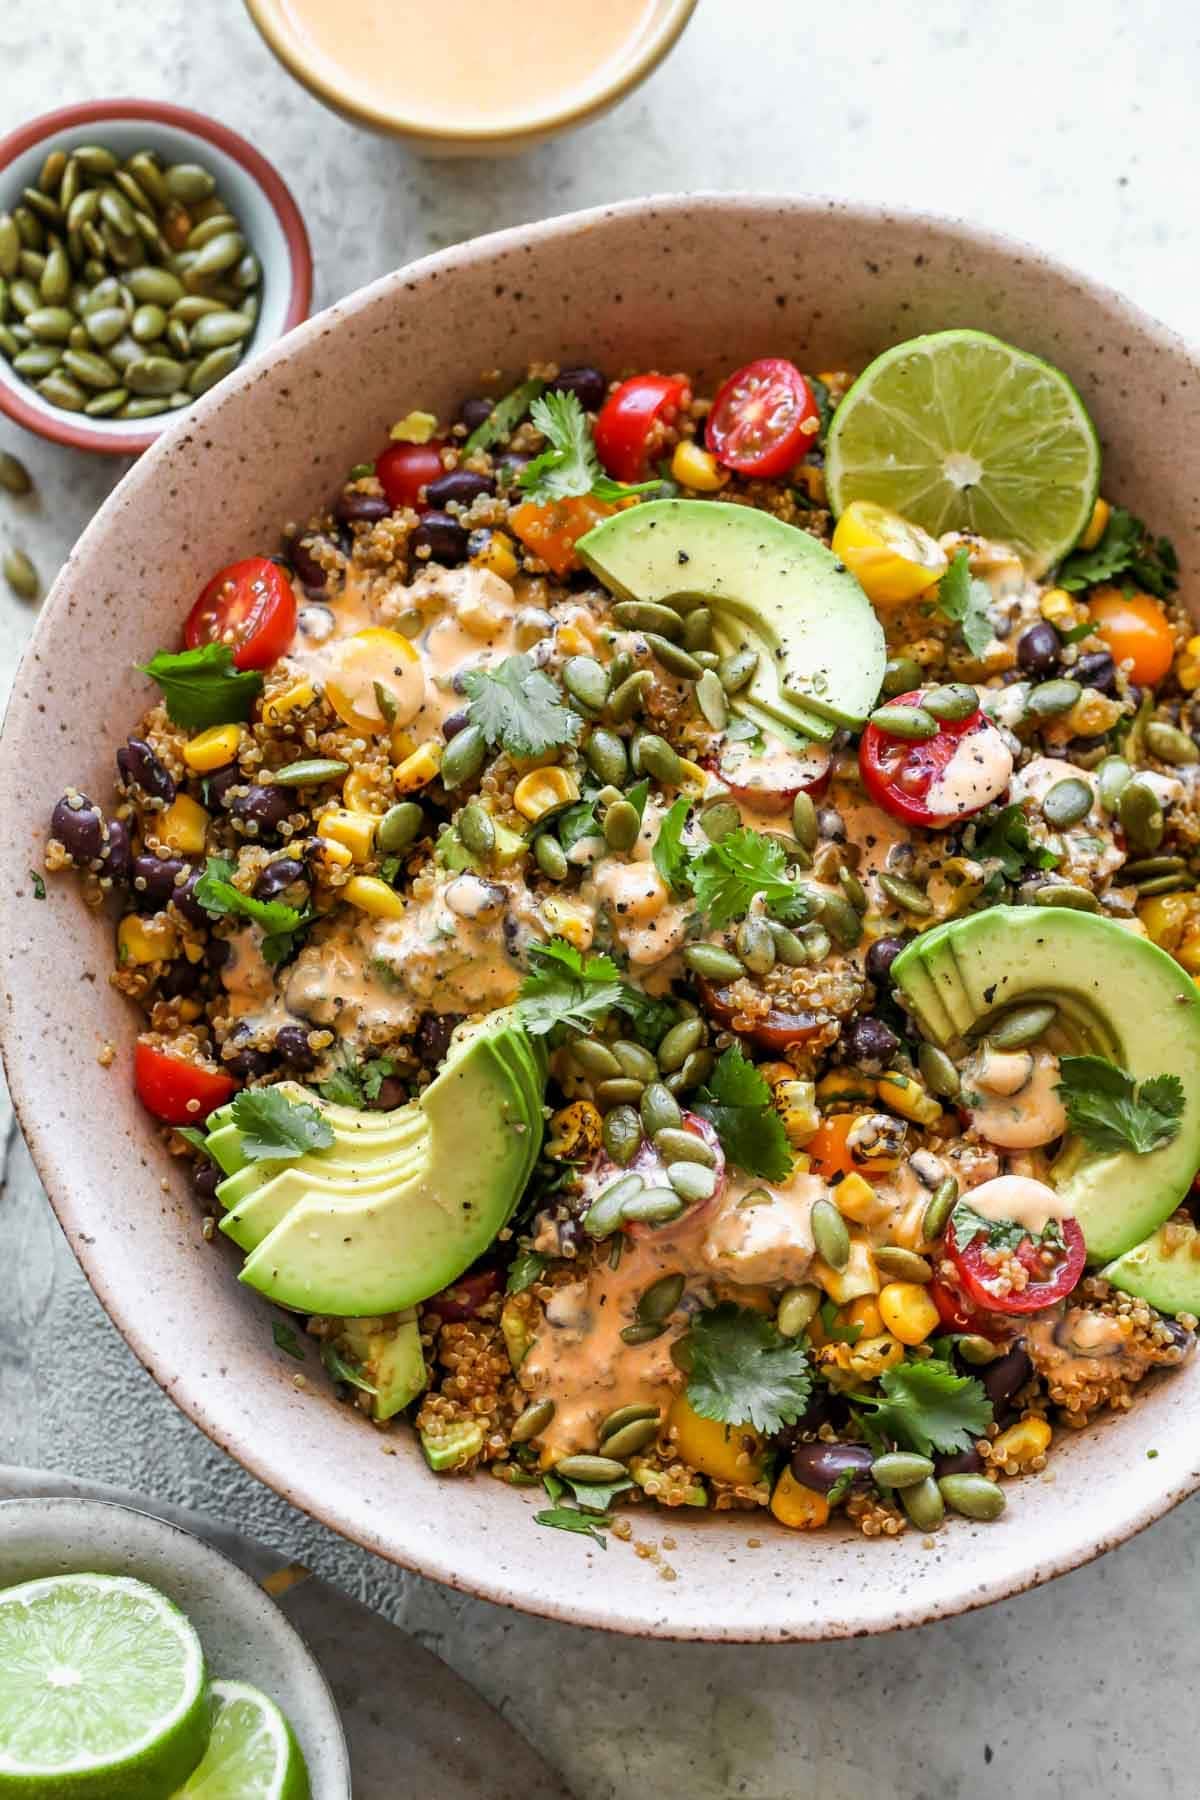 Salad in a bowl made with with black beans, fire-roasted corn, creamy avocado, and ripe tomatoes all tossed with a smoky chipotle dressing..